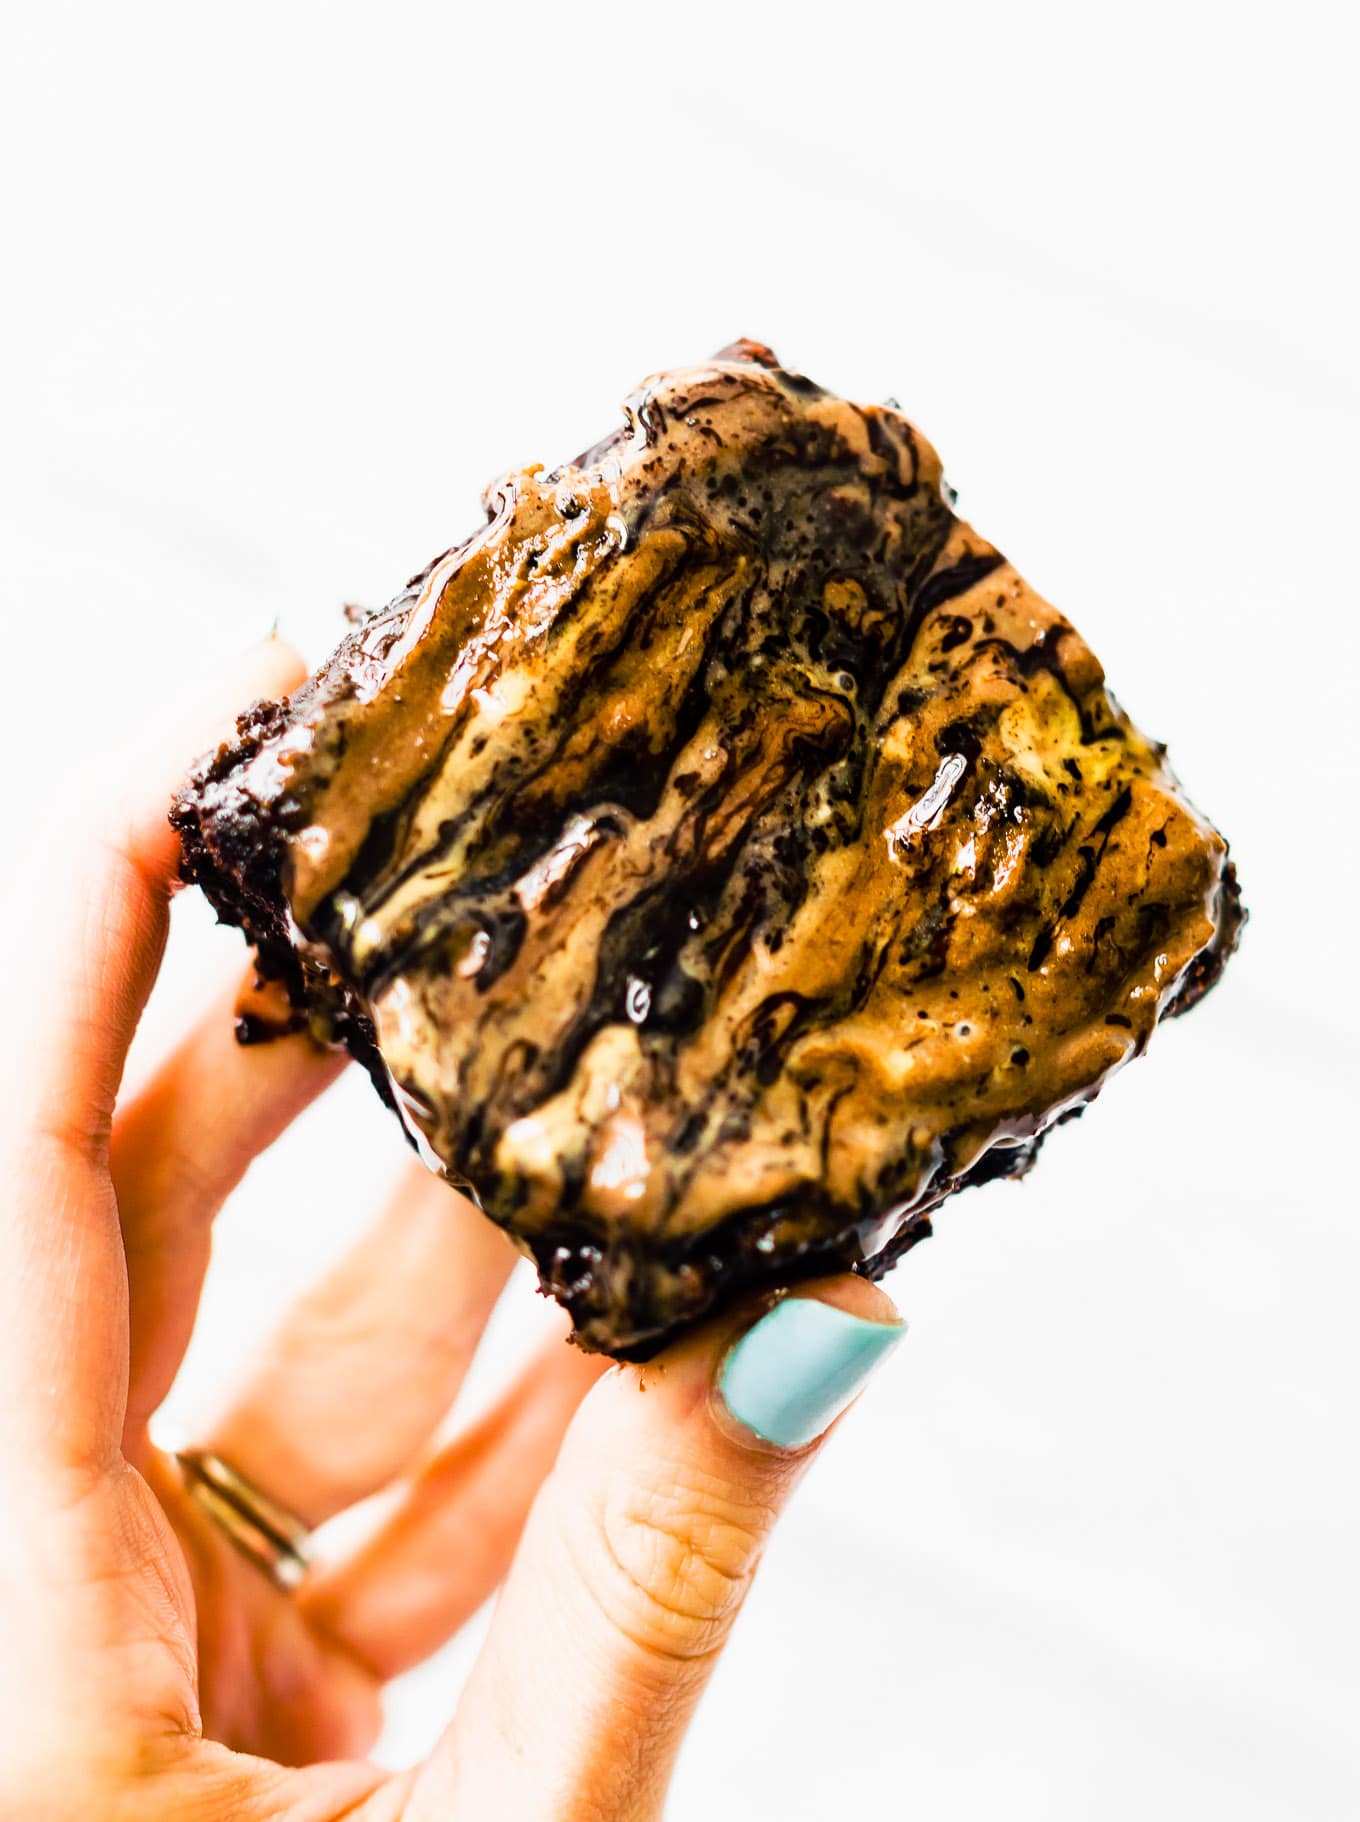 A single square maple tahini brownie with tahini frosting swirled on top being held against white background.